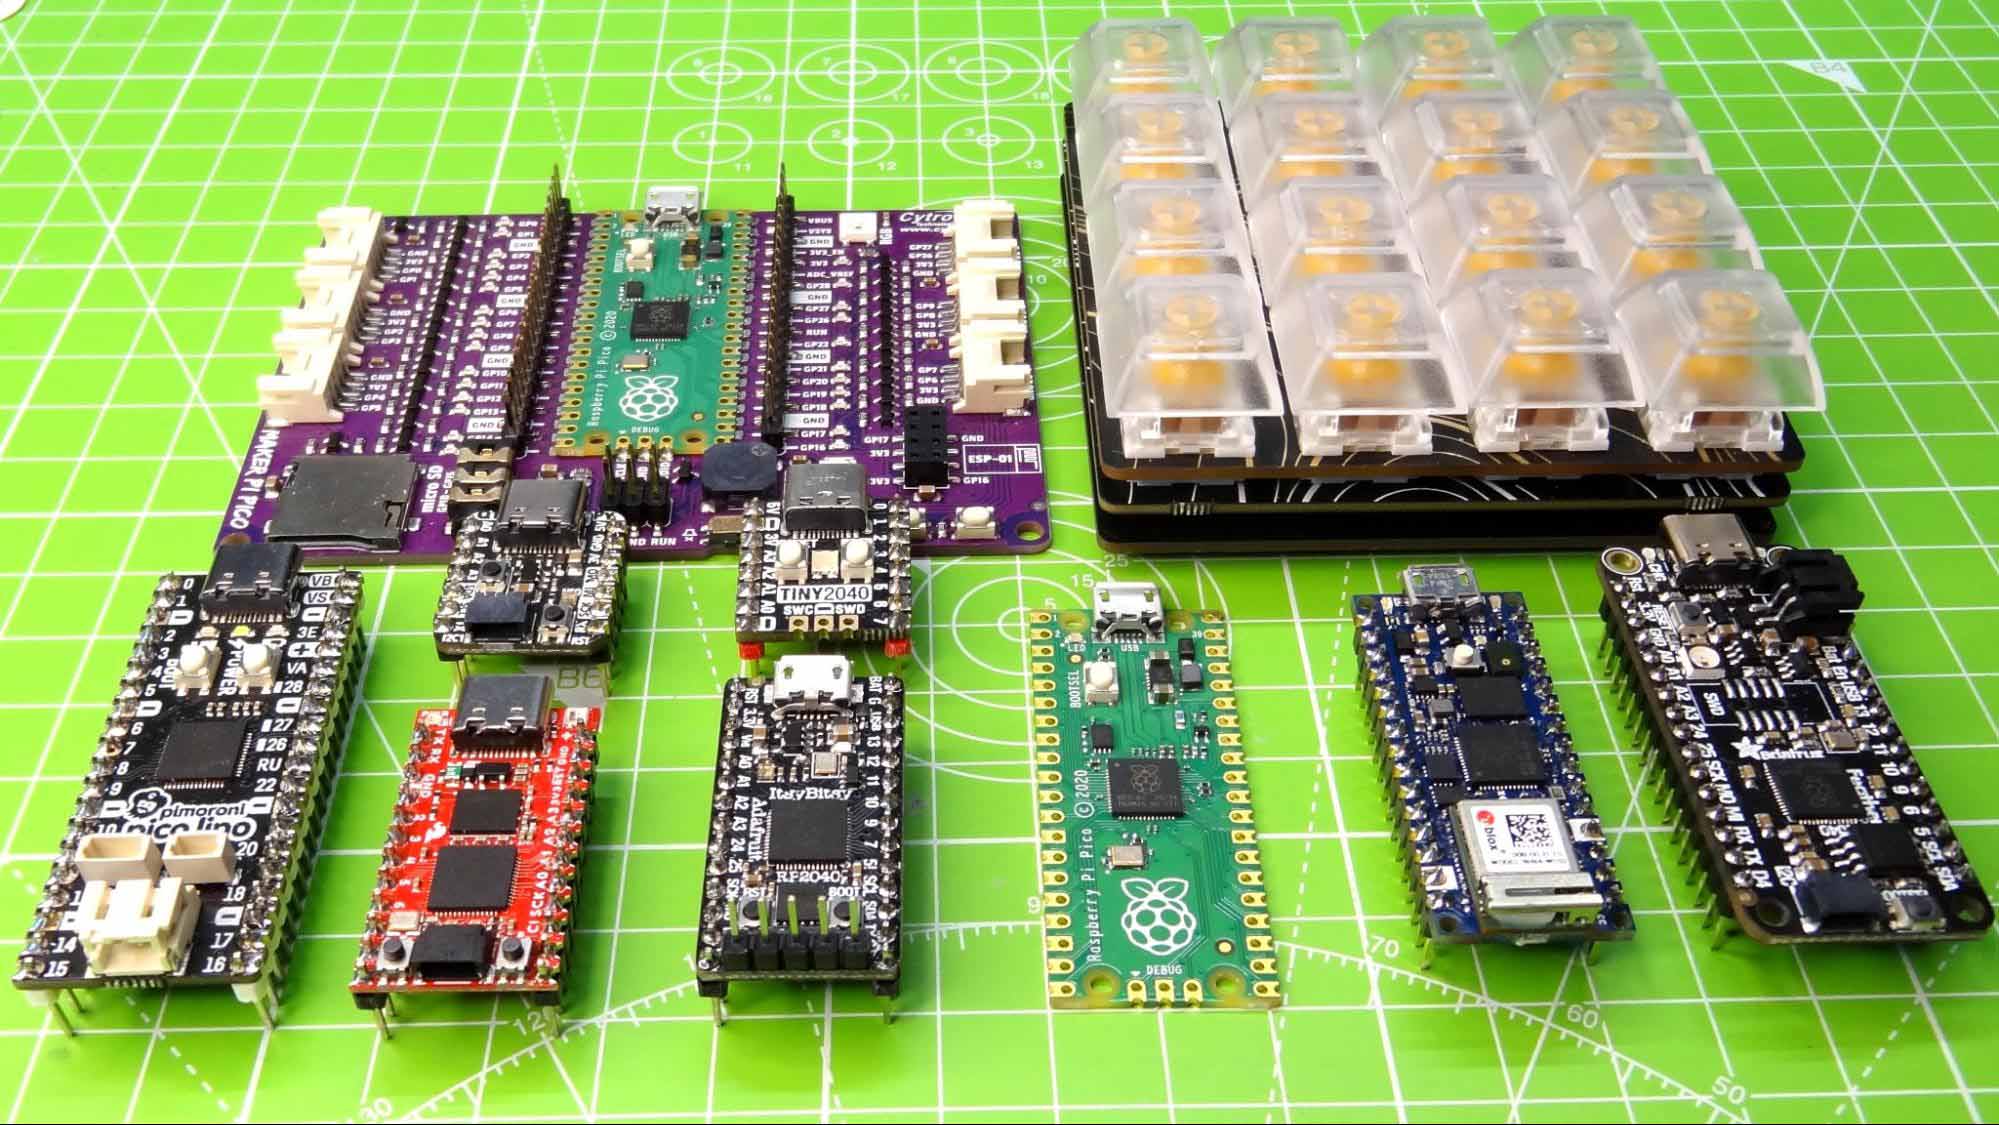 Inspiring Raspberry Pi RP2040 Projects for Midyear 2023 - element14  Community